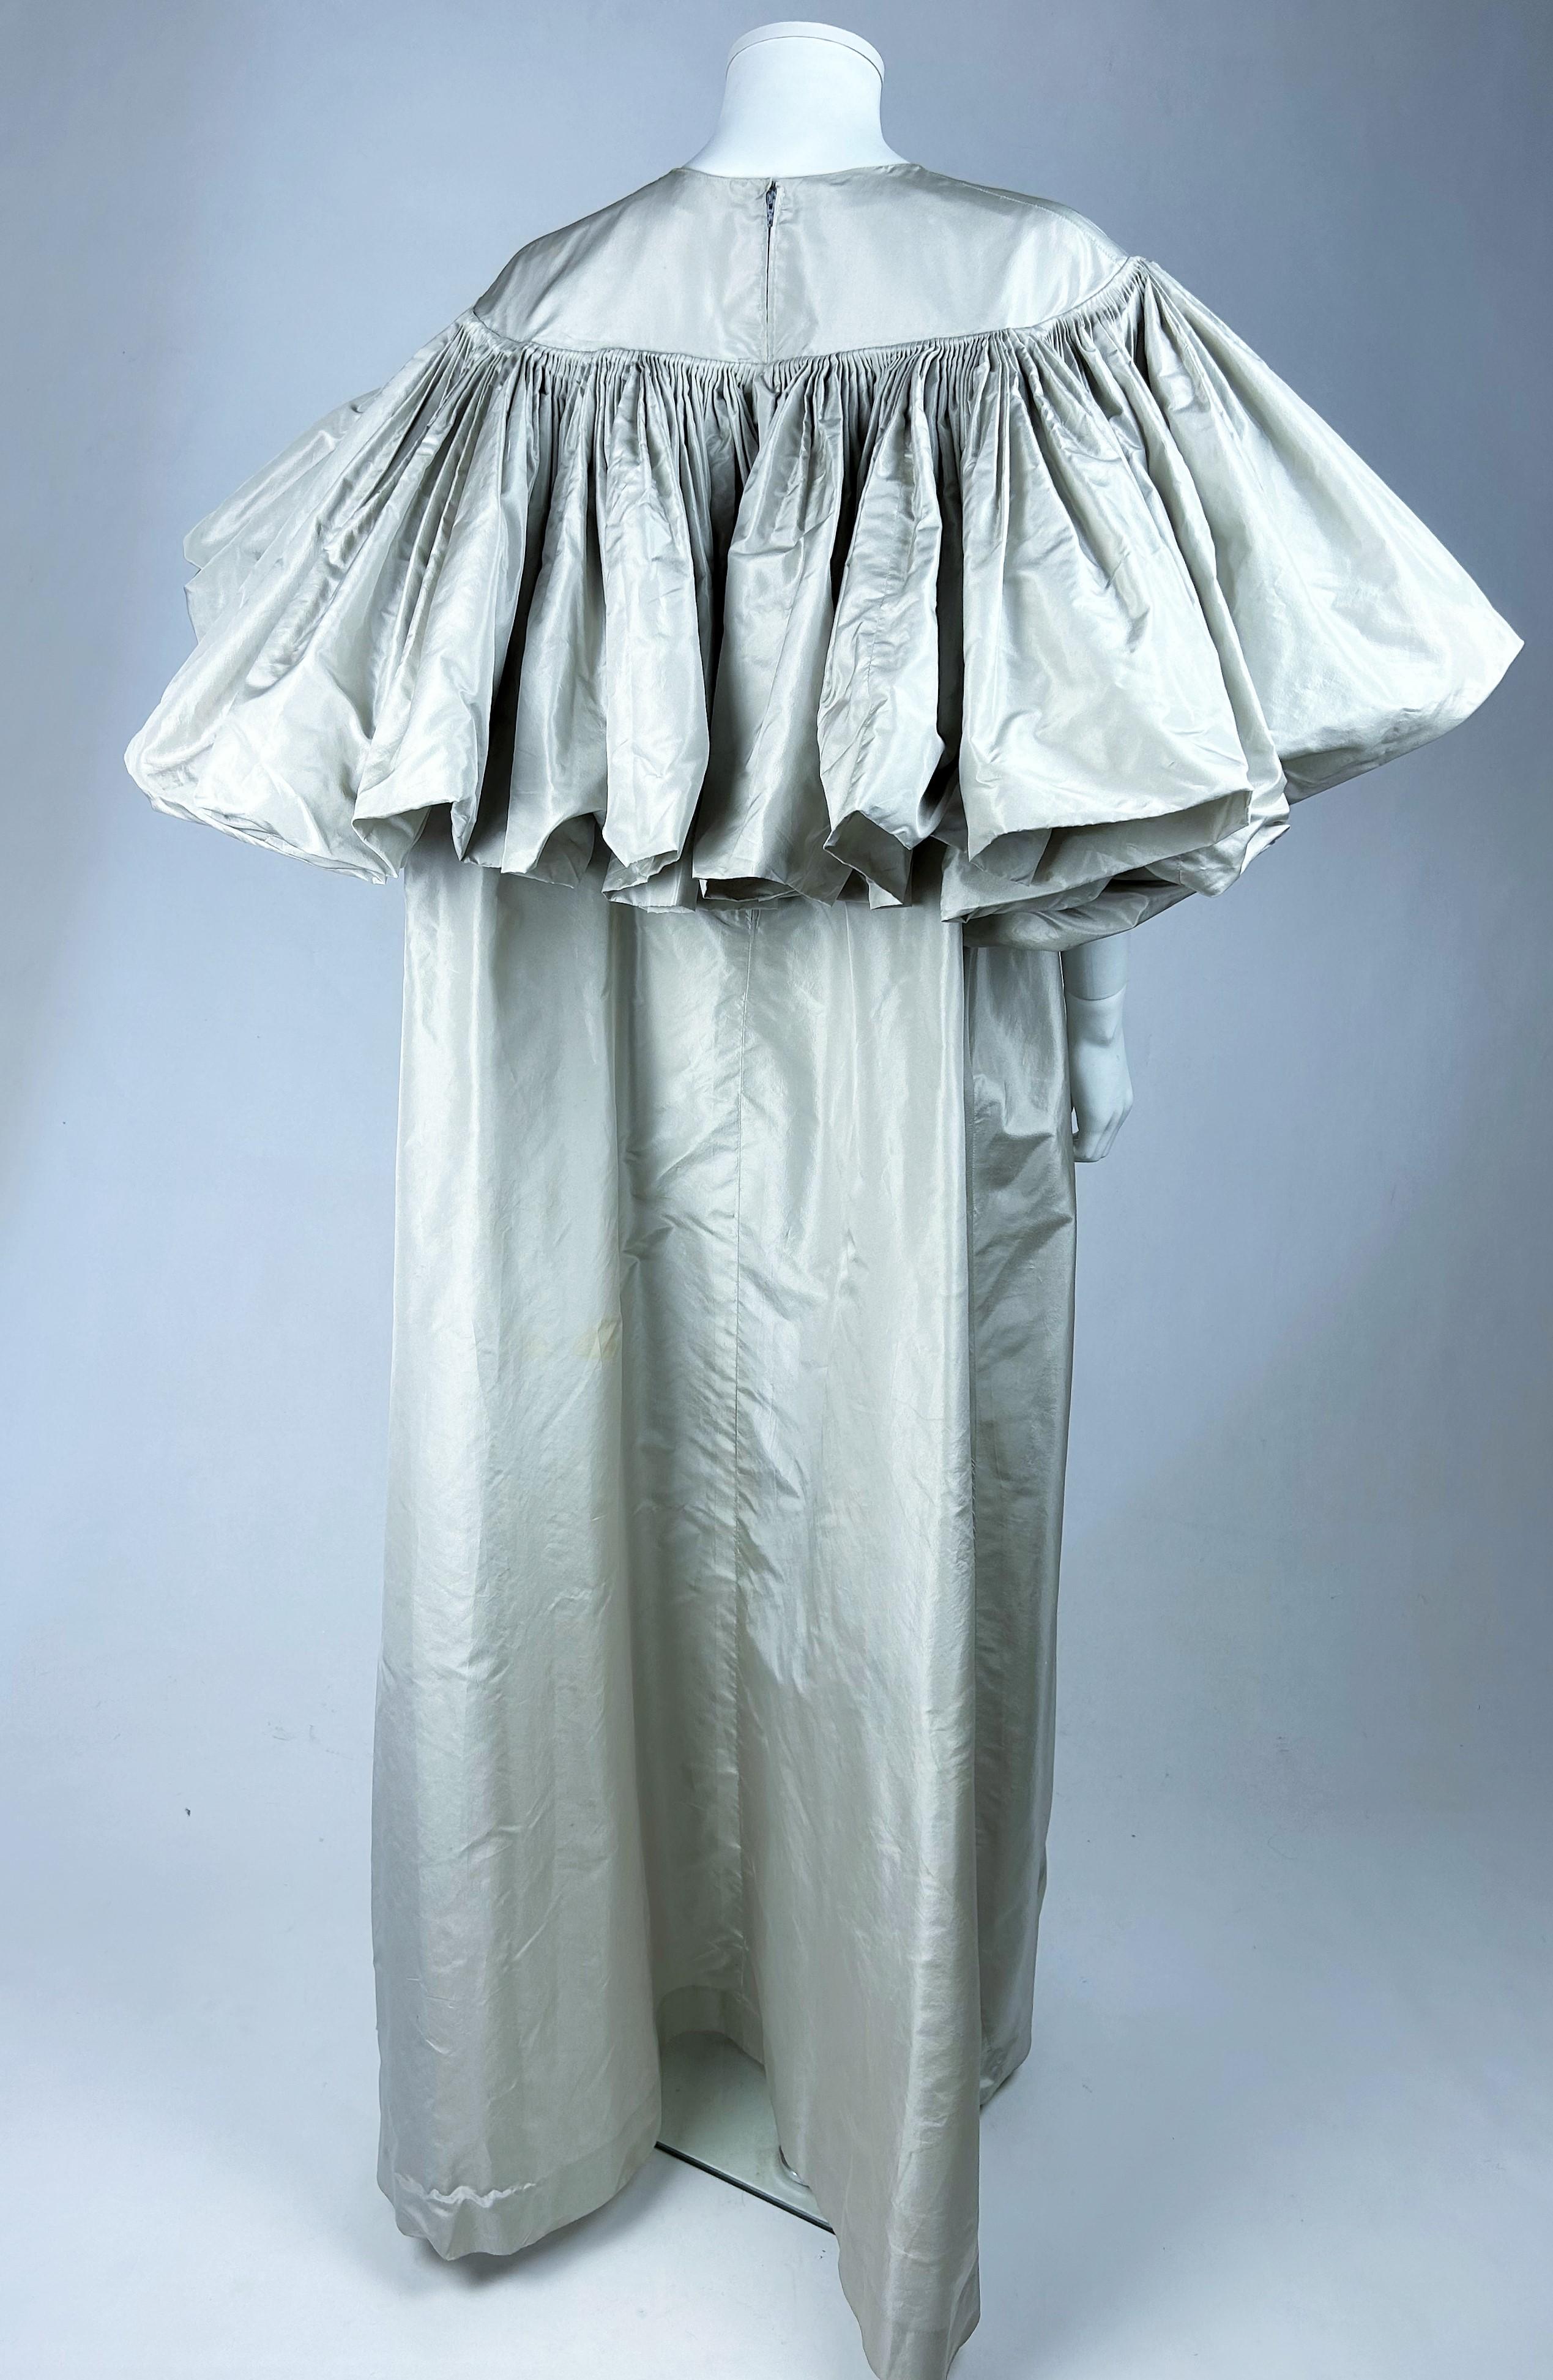 A Taffeta dress by Madame Grès Haute Couture (attributed to) - Paris 1977 6